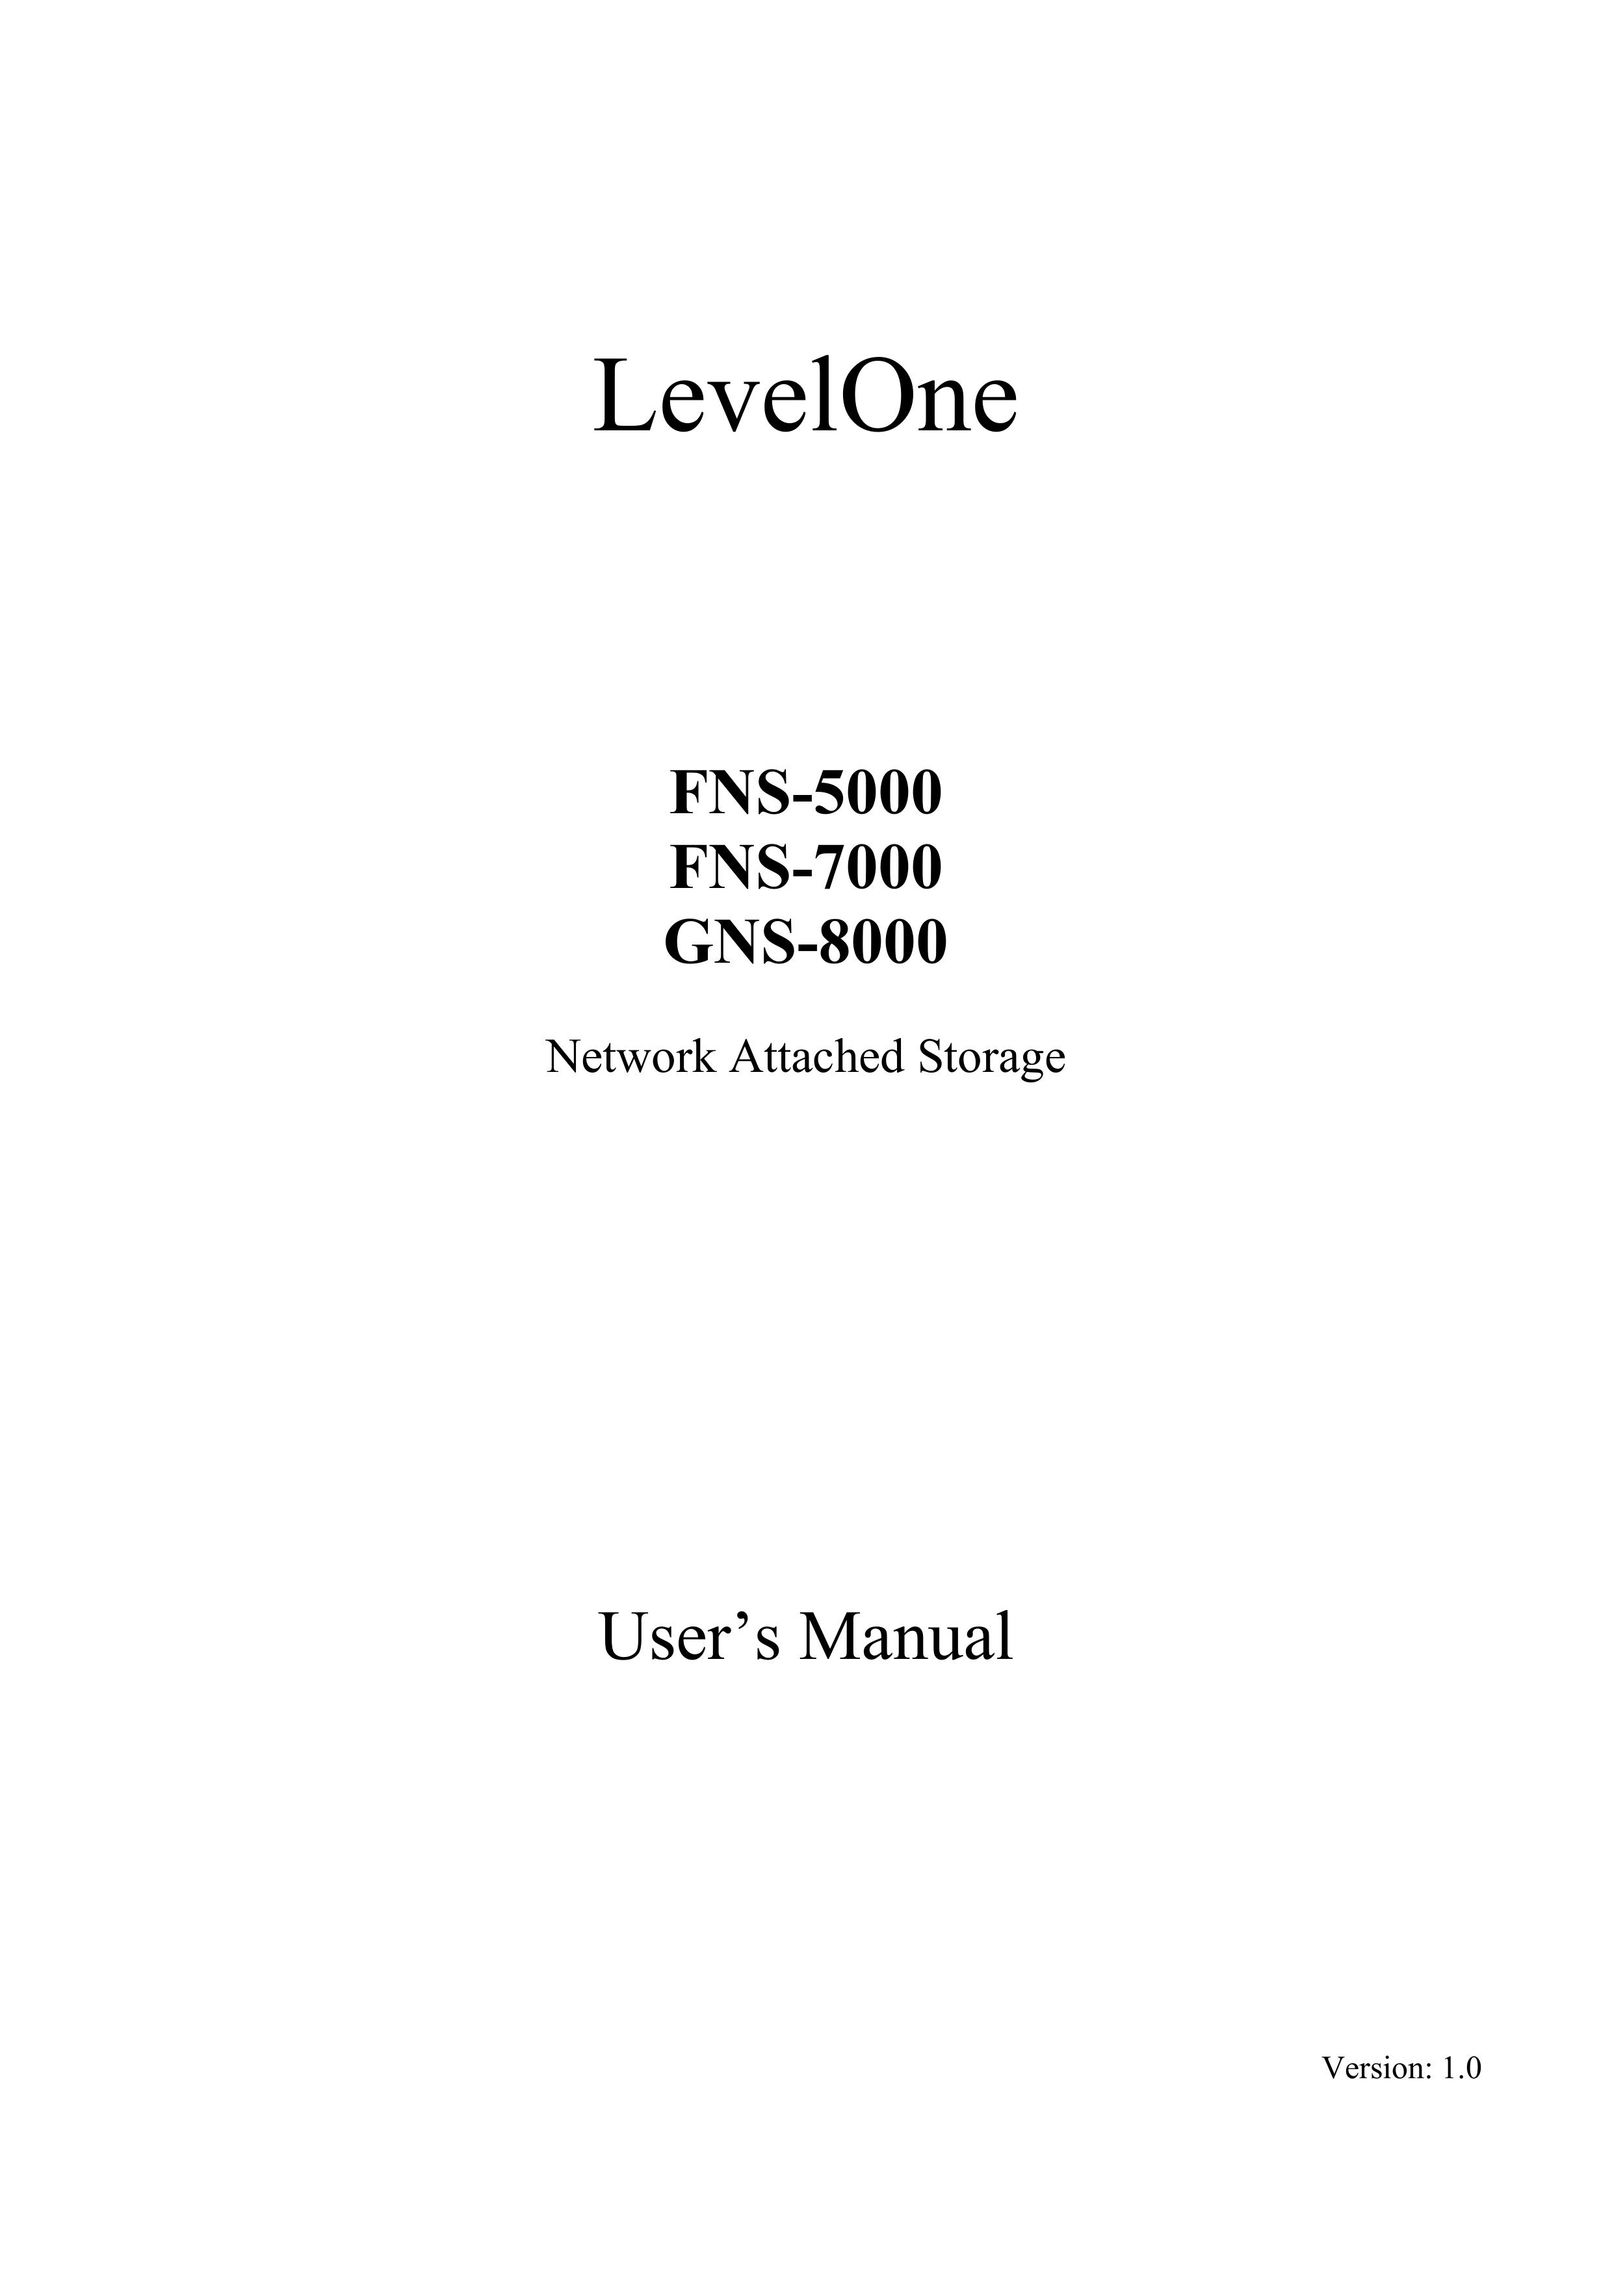 LevelOne FNS-5000 Network Card User Manual